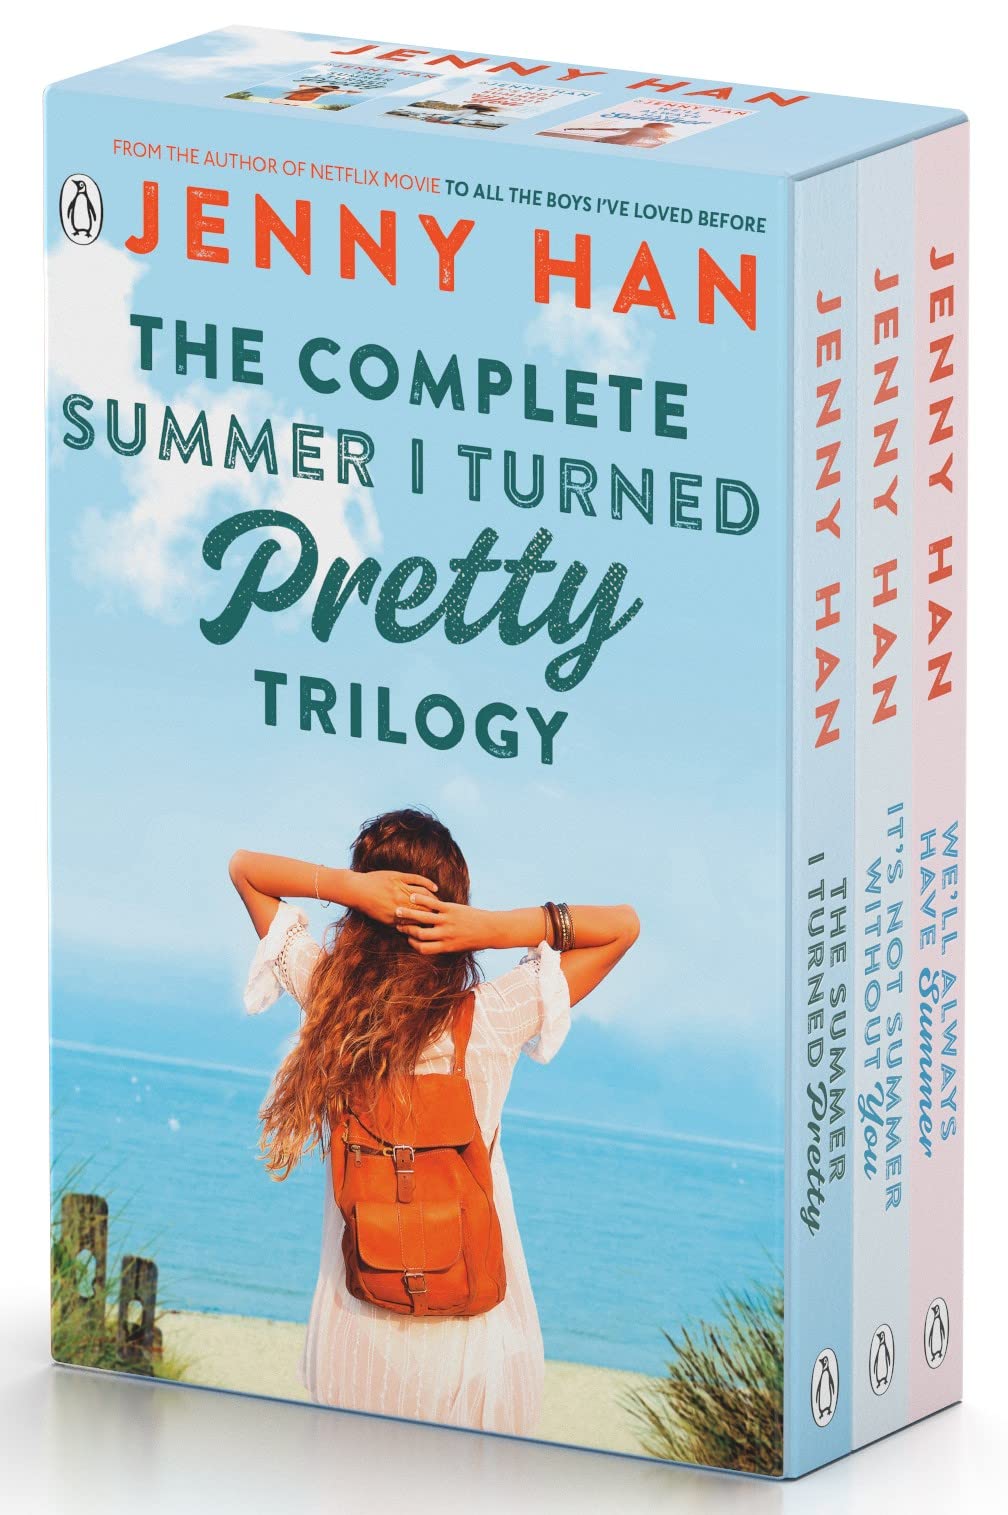 The Complete Summer I Turned Pretty Trilogy: The Summer I Turned Pretty;  It's Not Summer Without You; We'll Always Have Summer by Jenny Han